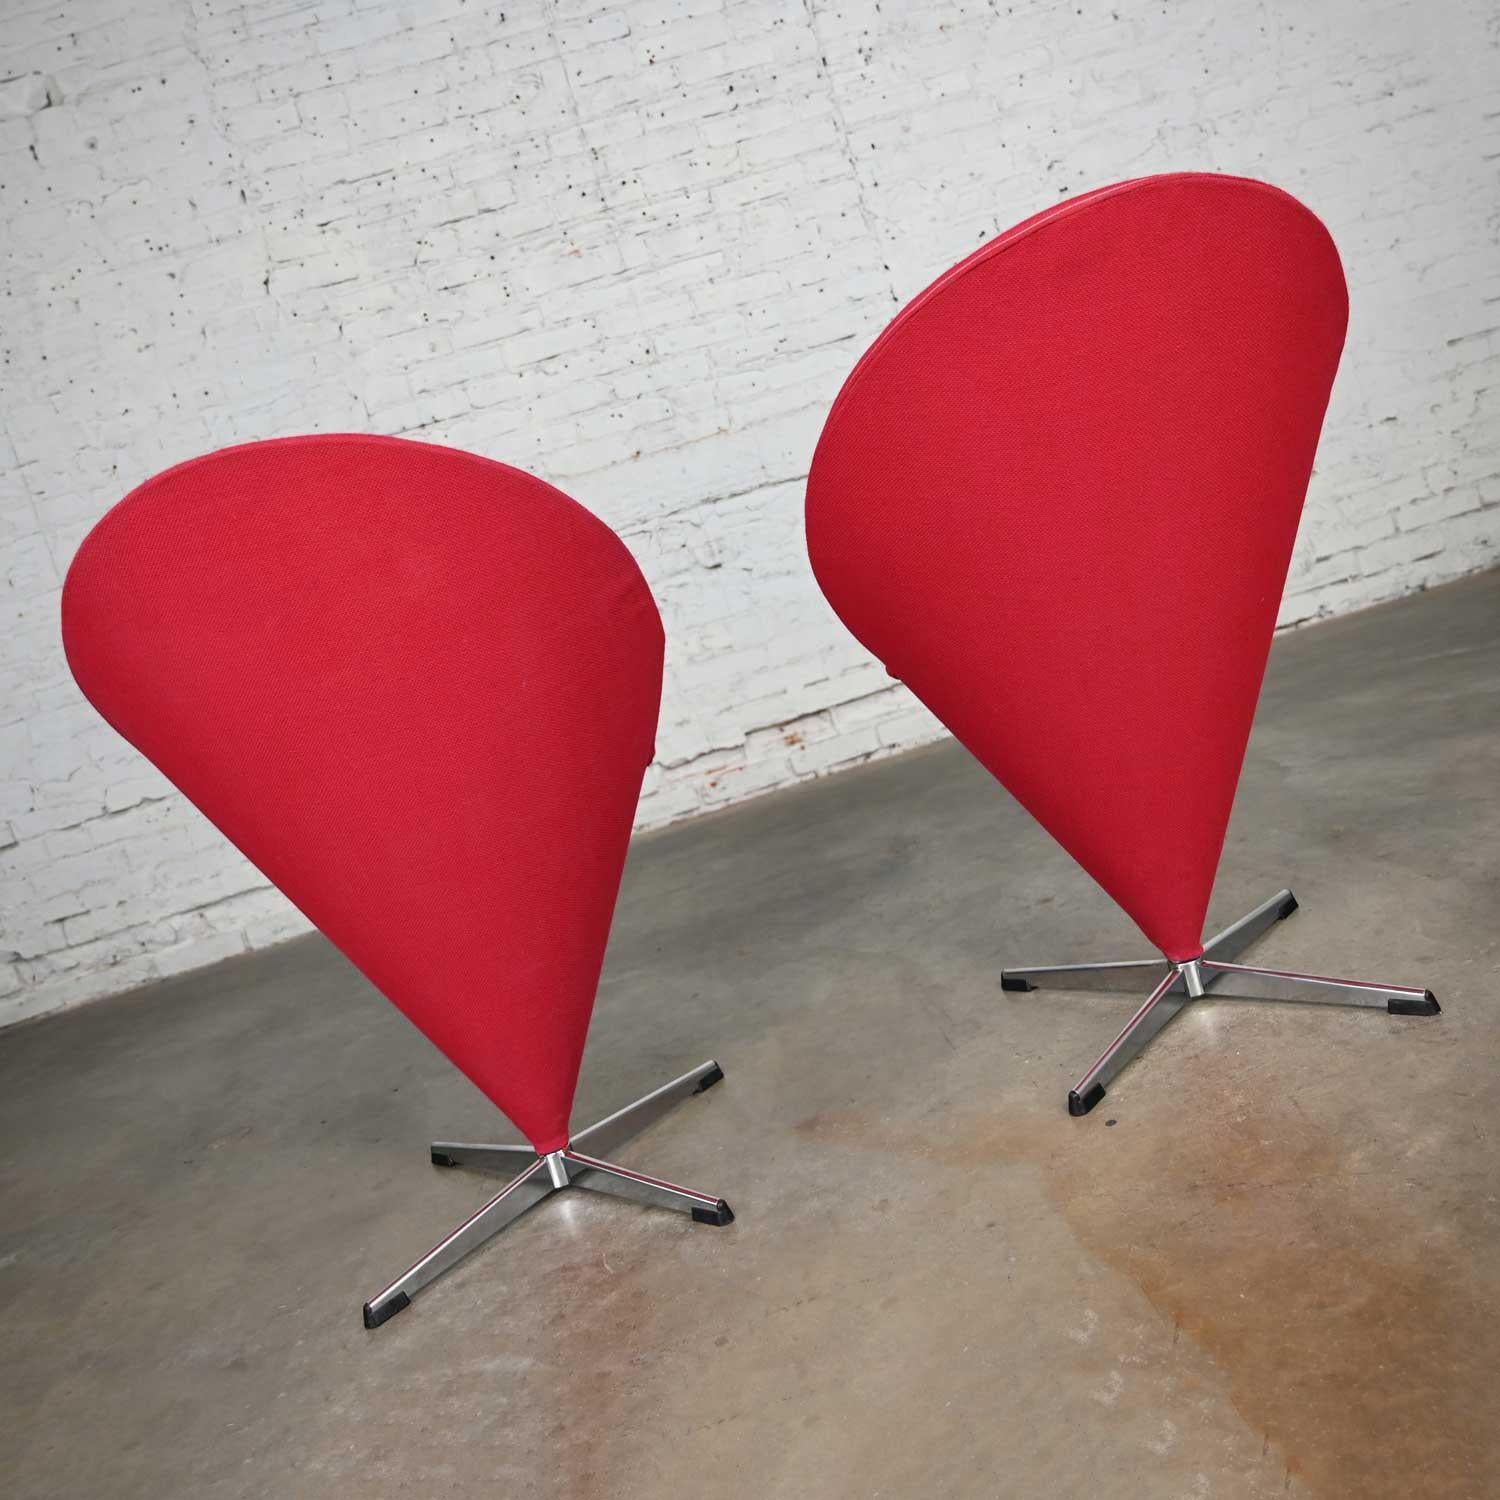 Pair Vintage Mid-Century Modern Red Cone Chairs Verner Panton for Fritz Hansen For Sale 5